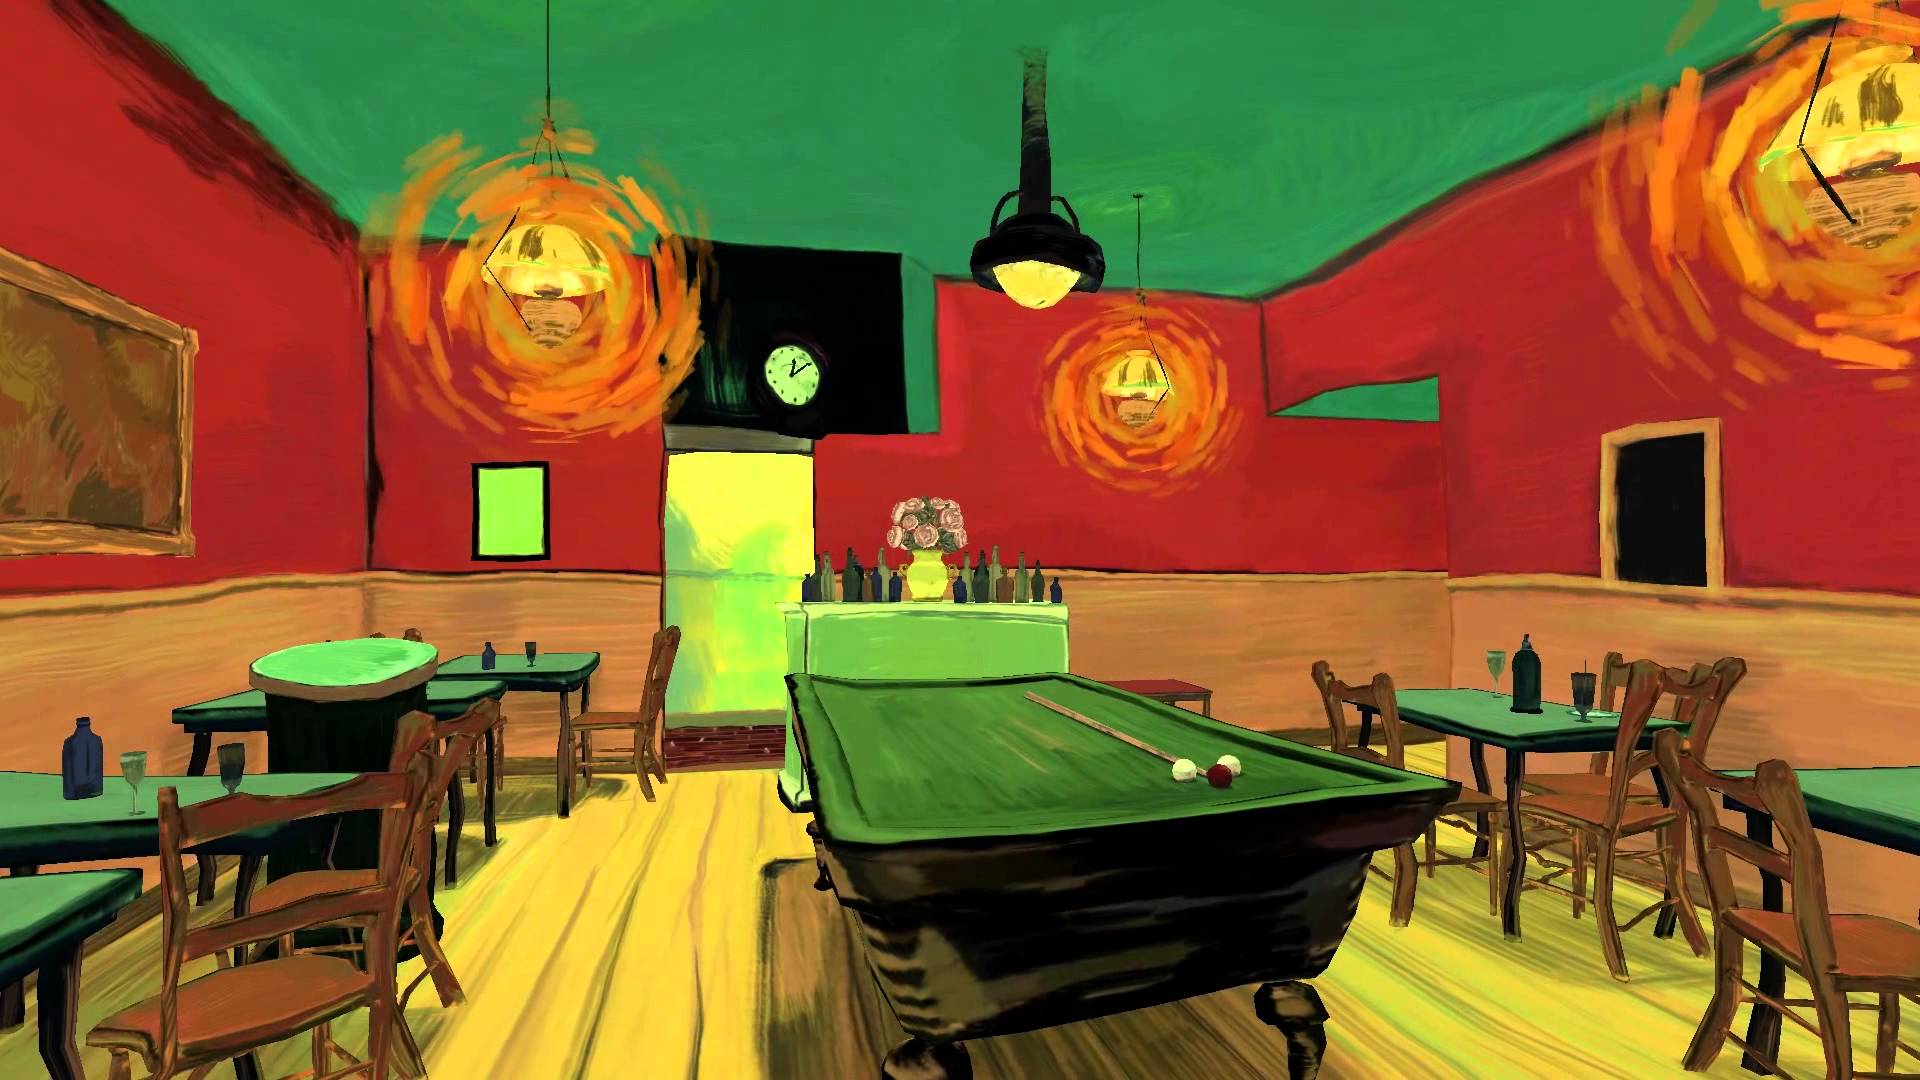 The Night Cafe Immersive VR Tribute to Vincent van Gogh